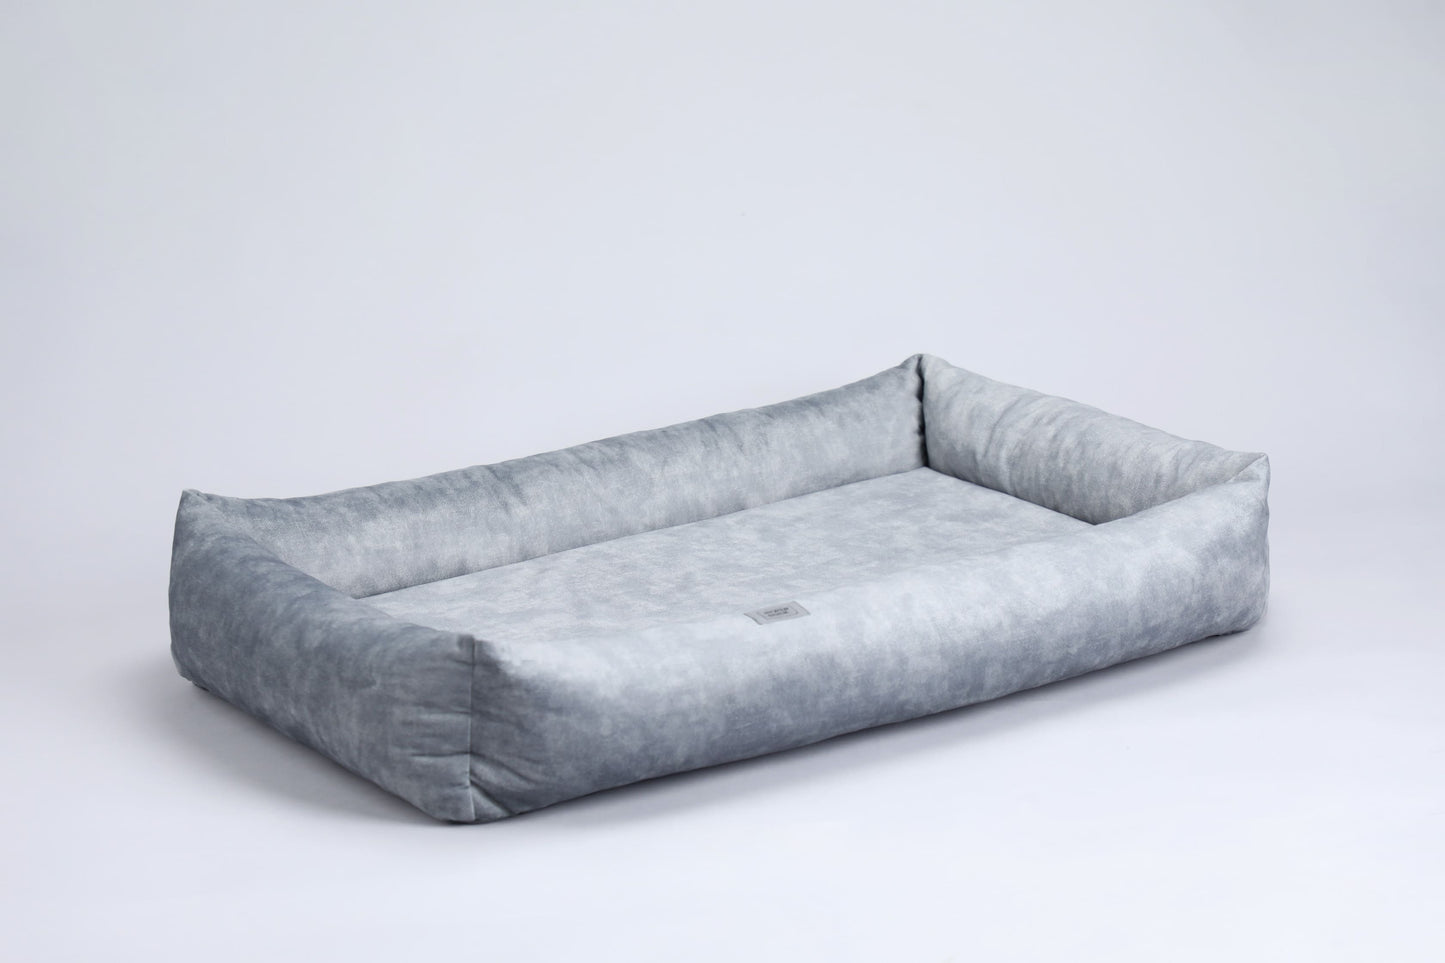 2-sided classic dog bed. METAL GREY - European handmade dog accessories by My Wild Other